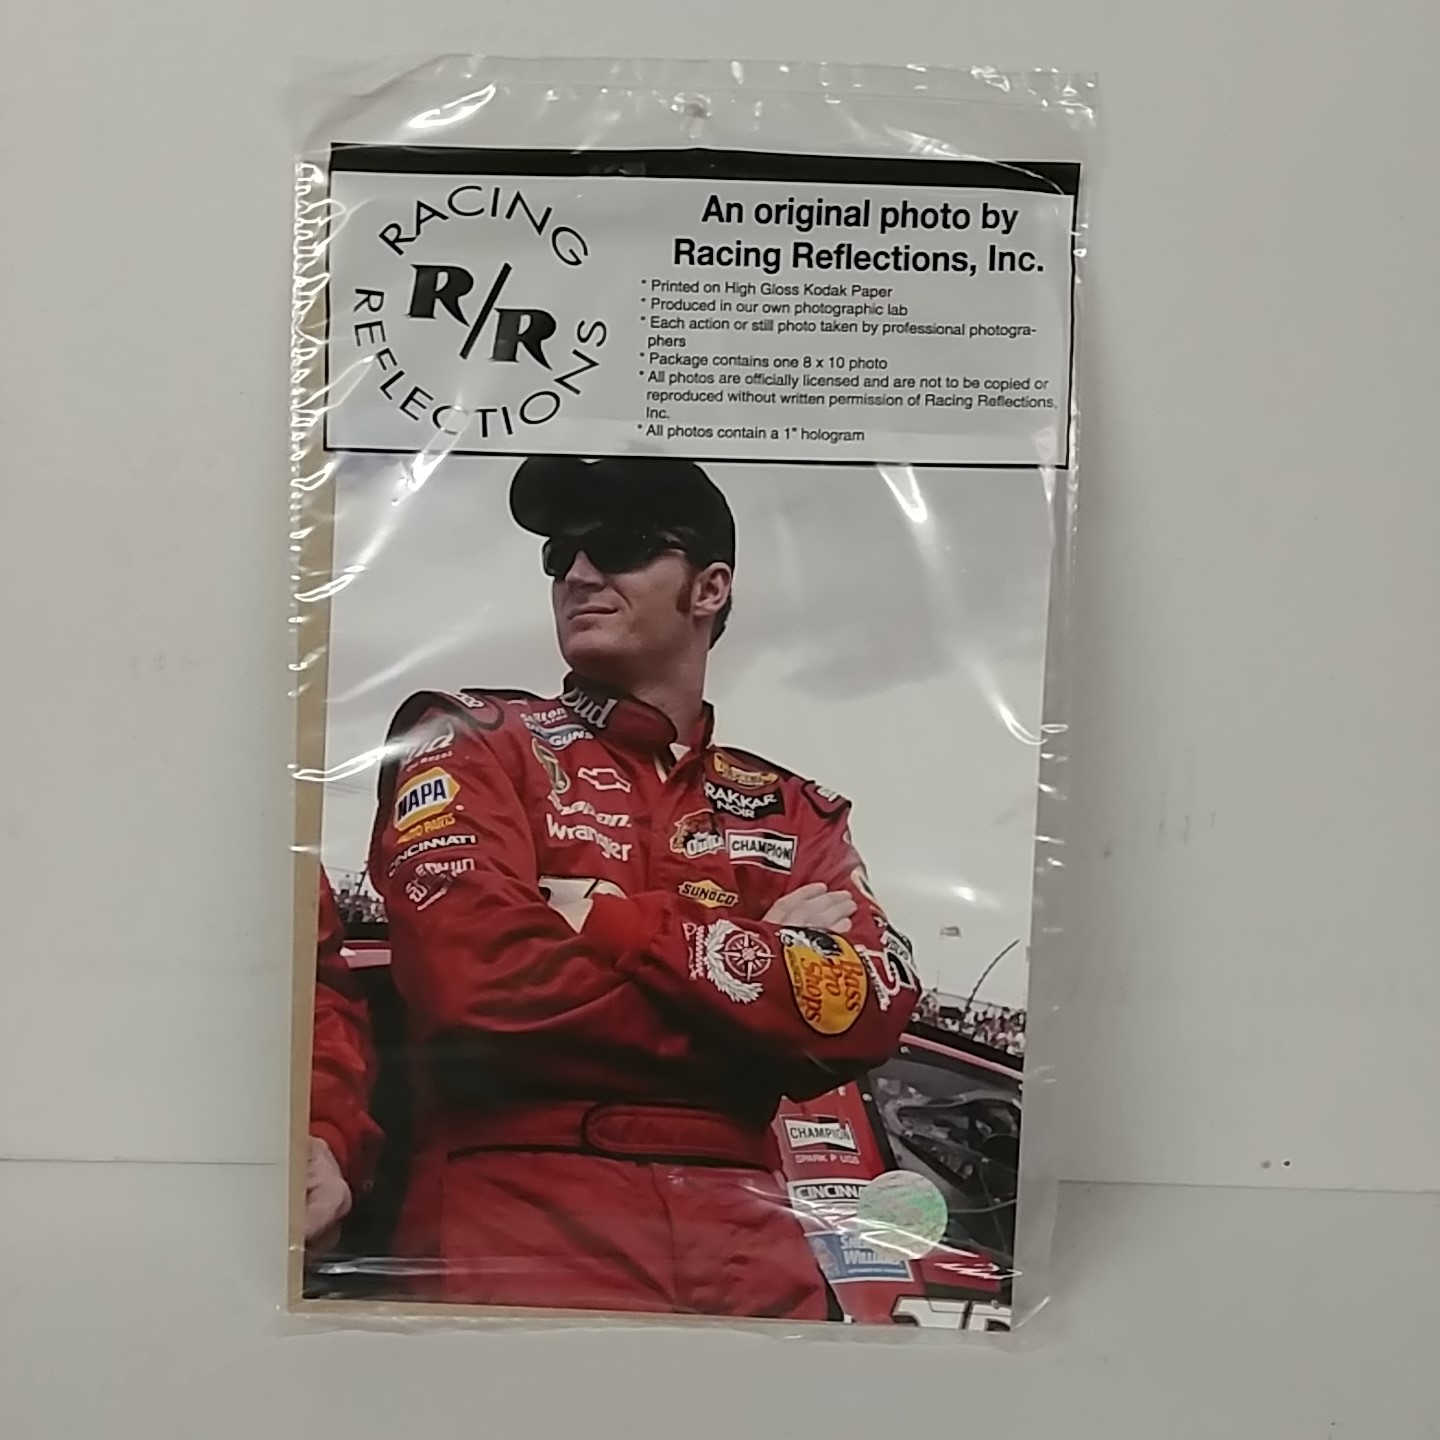 2004 Dale Earnhardt Jr Budweiser "Looking Right" Racing Reflections Photo